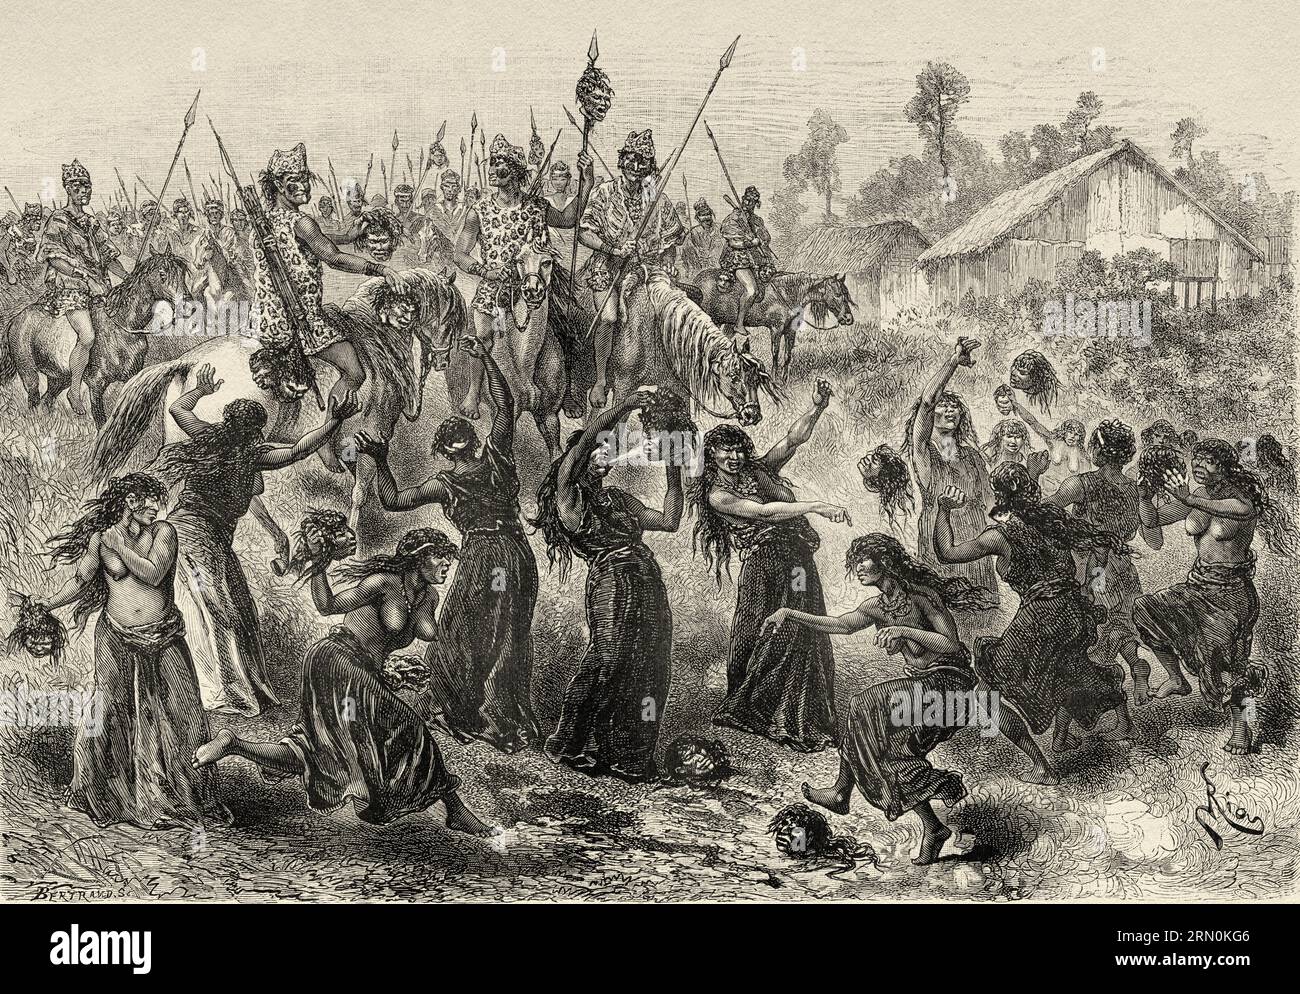 Native Chiriguano Indians returning from the war, Bolivia, South America. Journey in search of the remains of the Crevaux mission by Émile-Arthur Thouar 1884. Old 19th century engraving from Le Tour du Monde 1906 Stock Photo